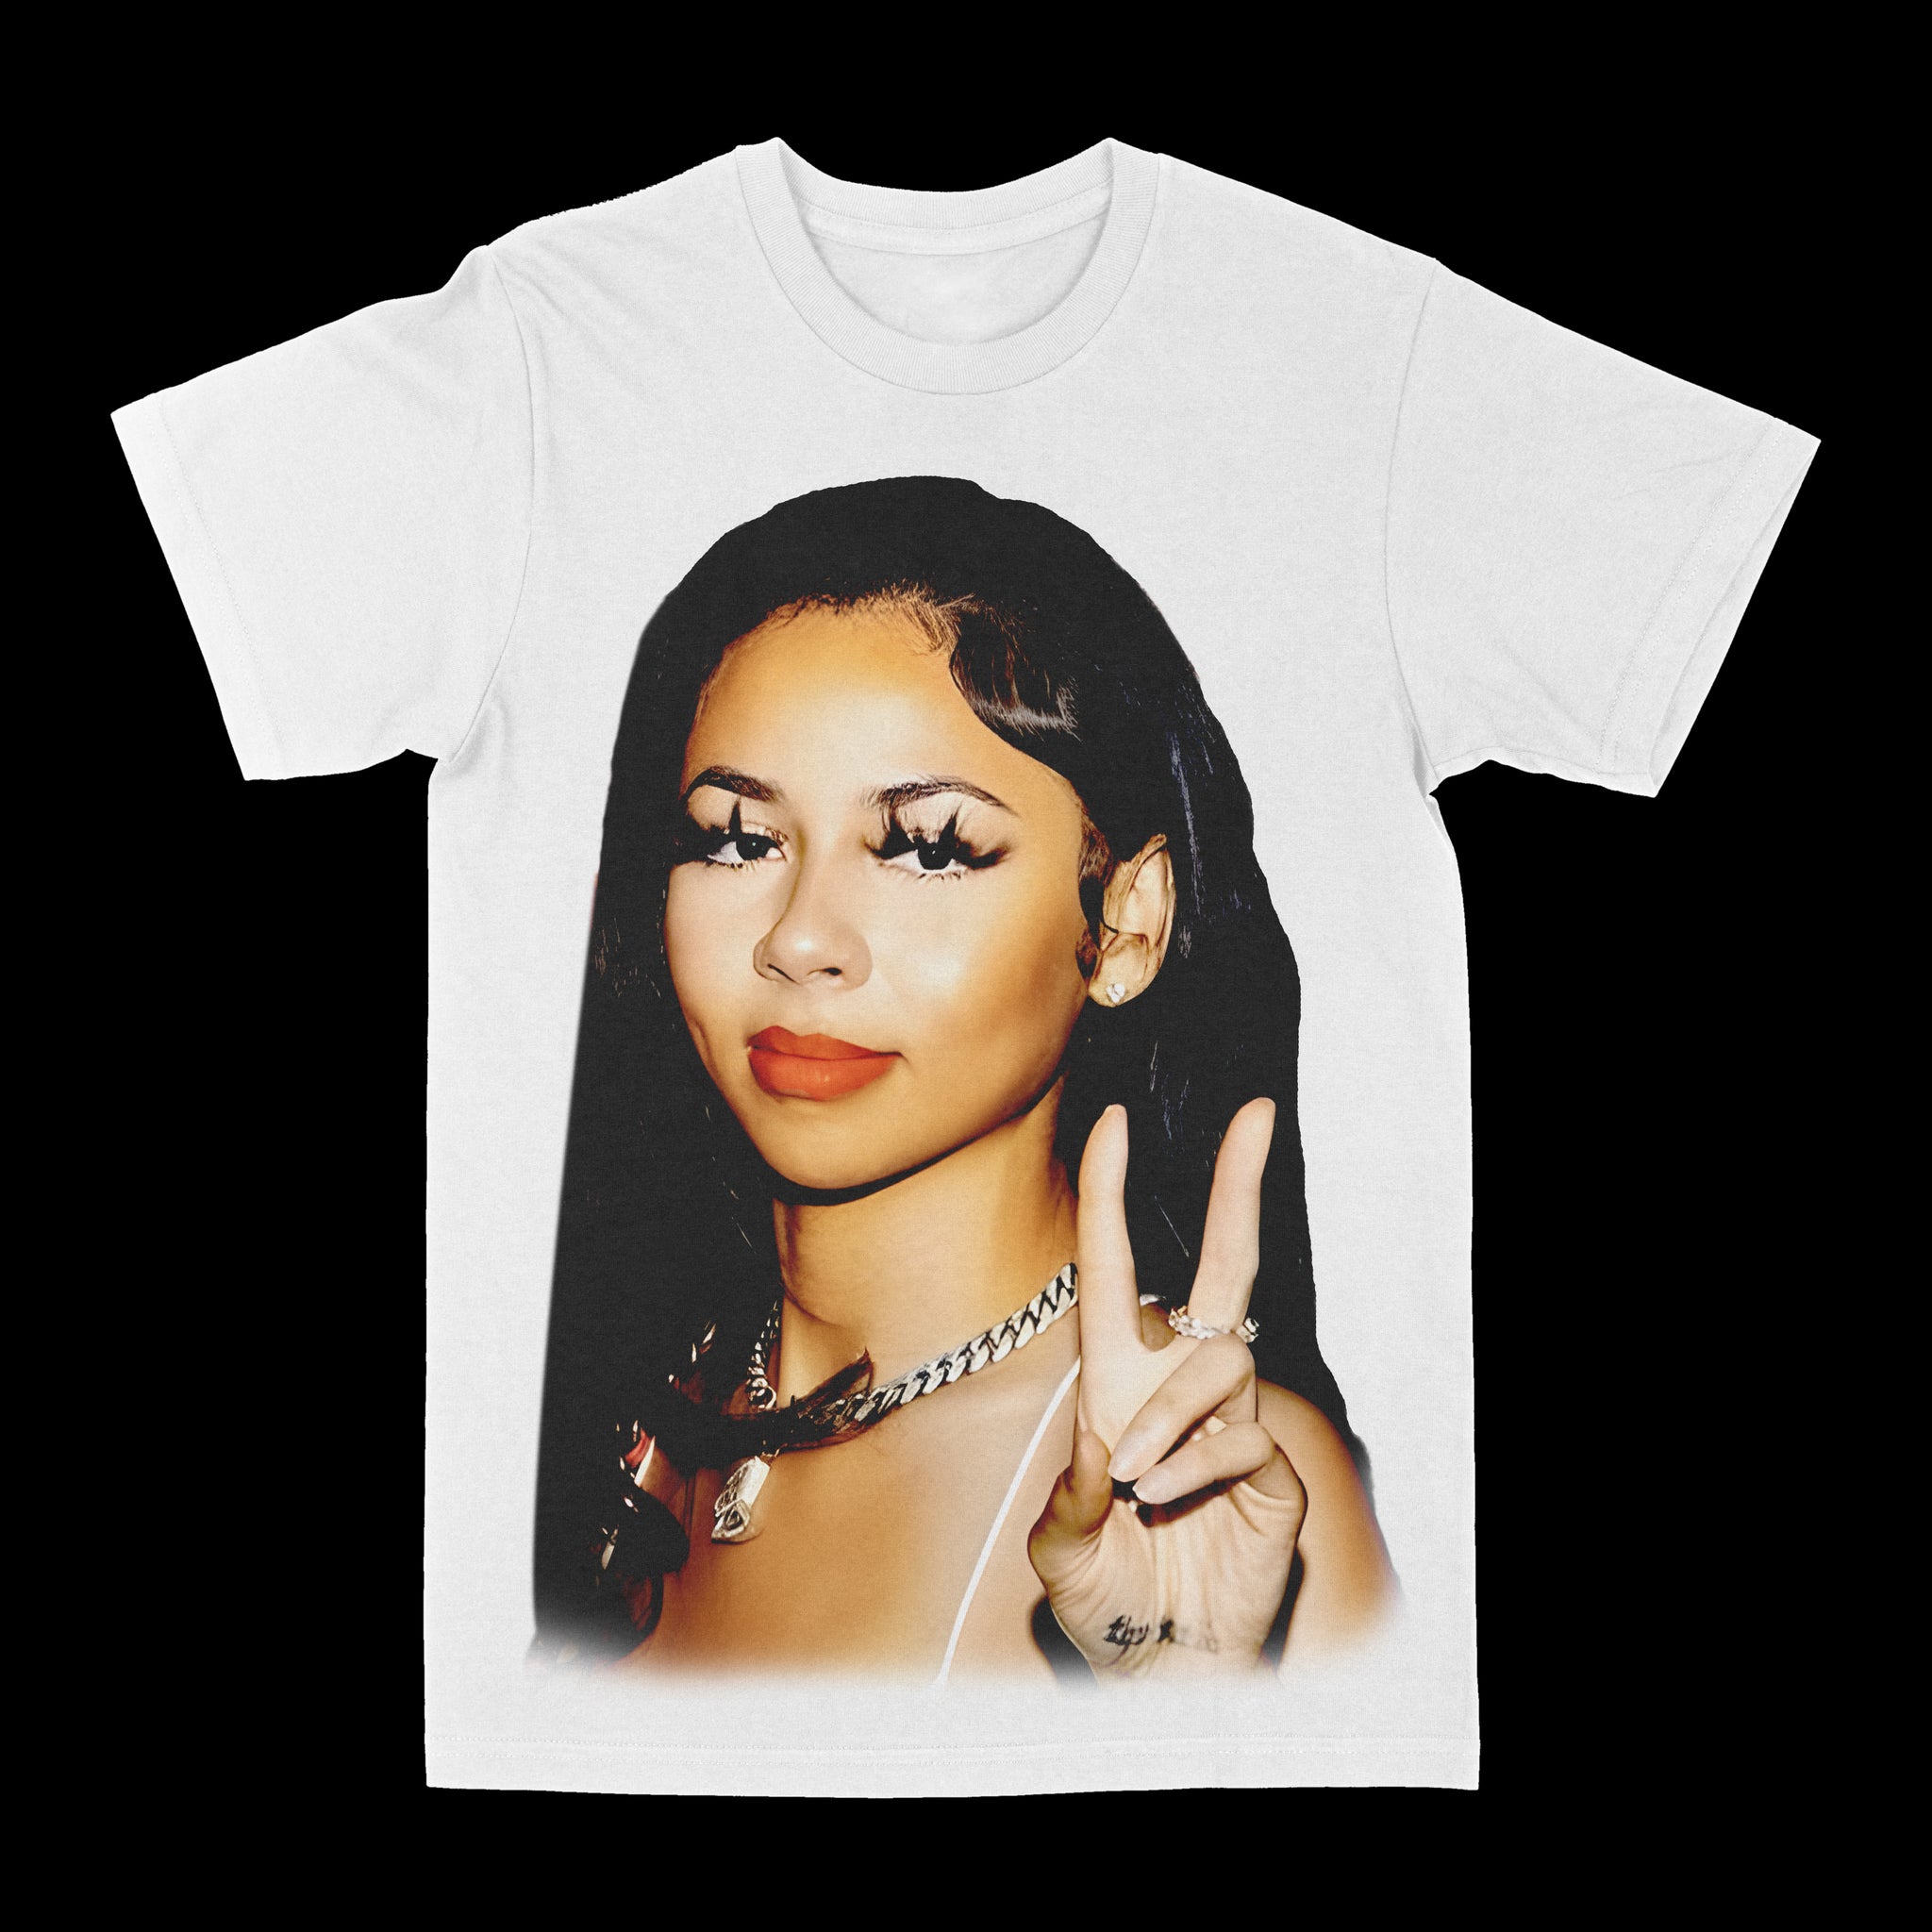 Mariah The Scientist "Big Face Peace" Graphic Tee